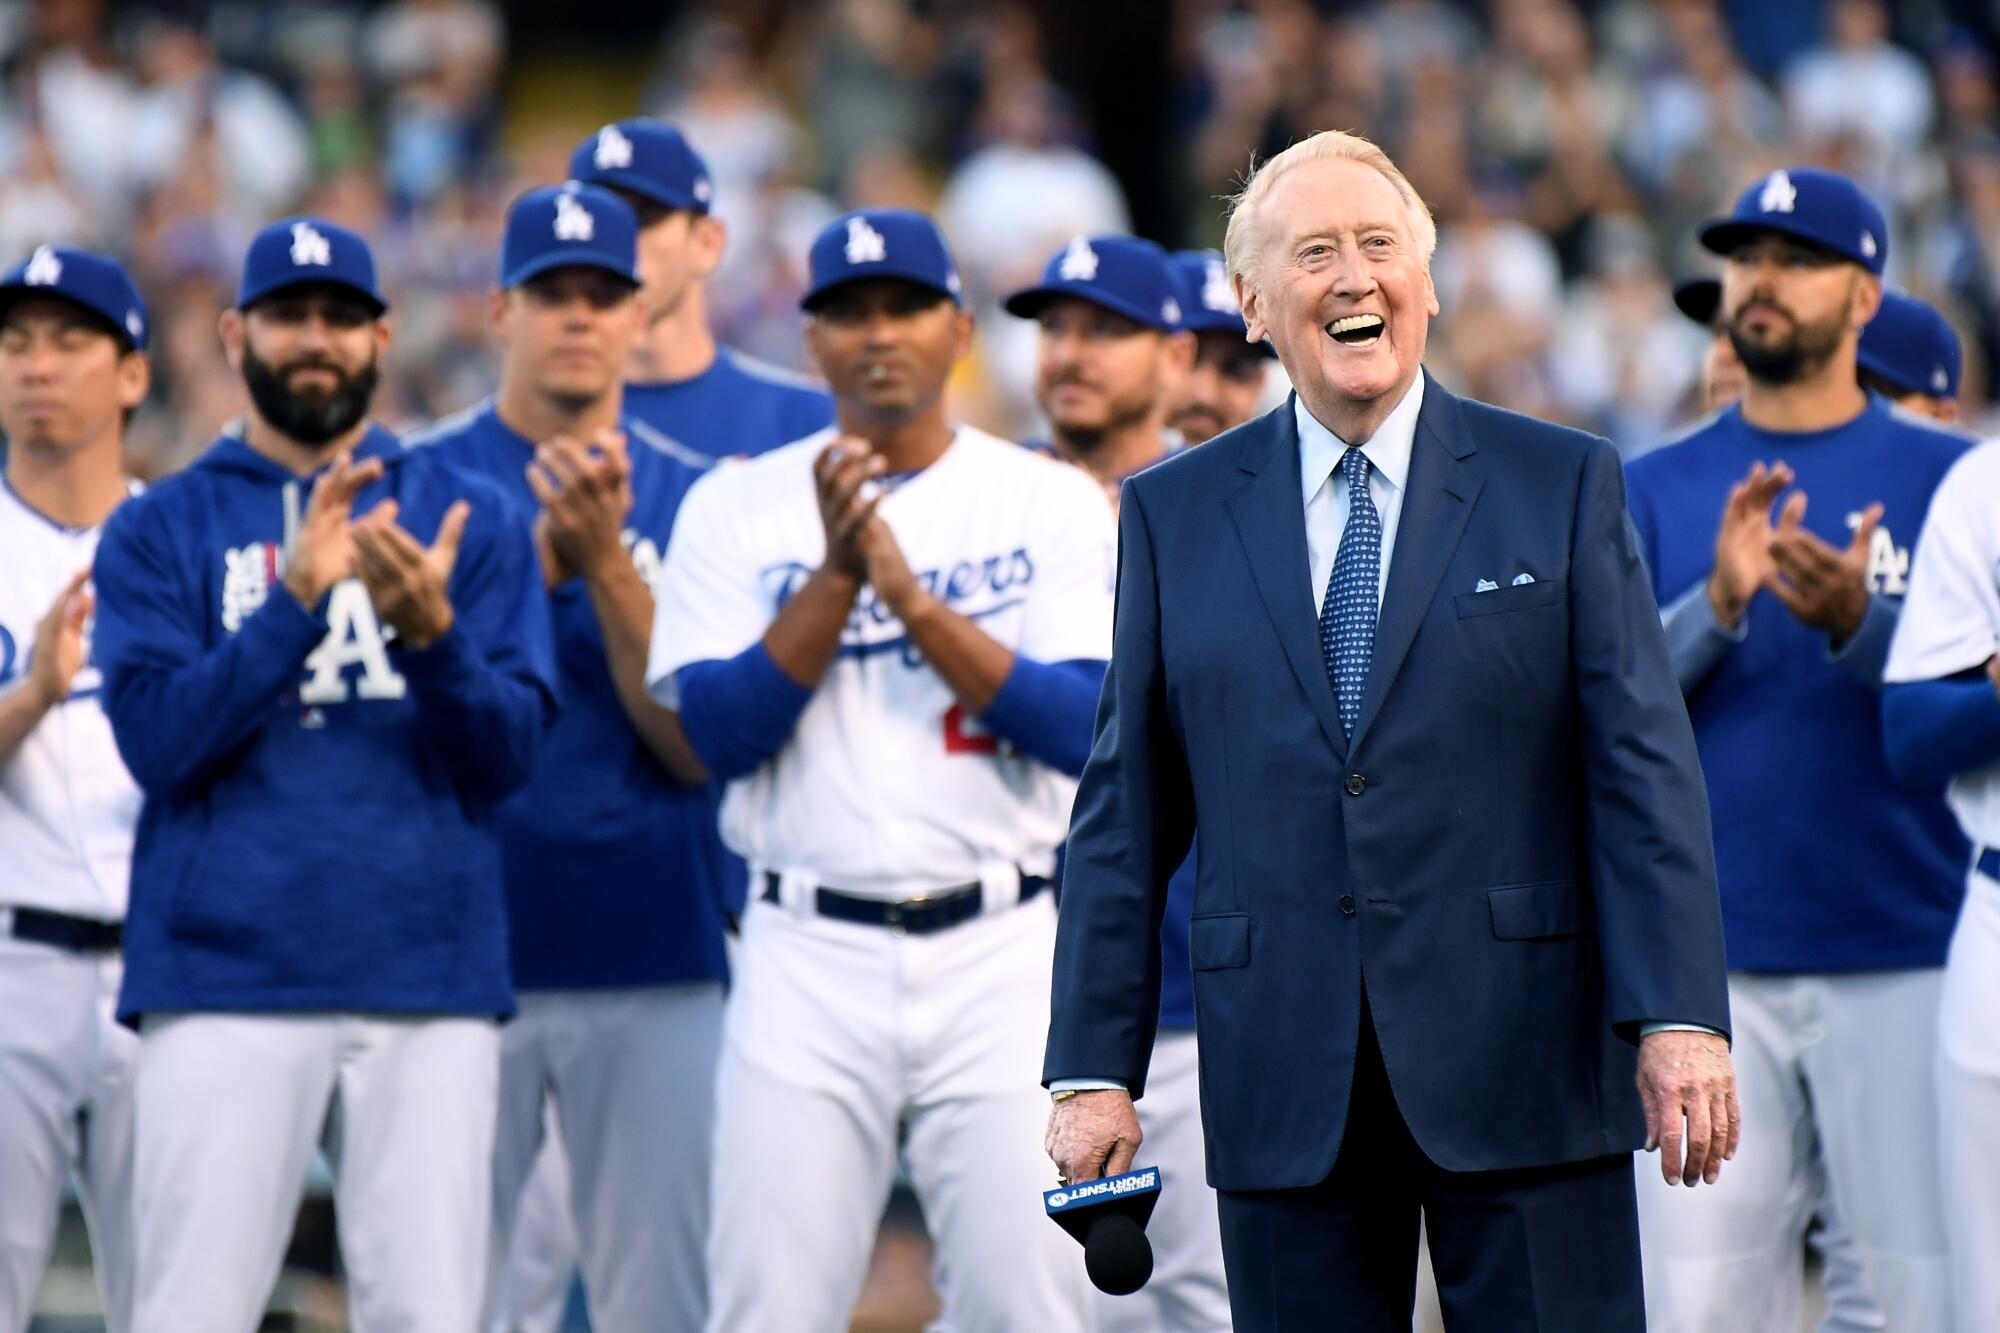 Hershiser, Cartwright Among Those Announced For Induction Into